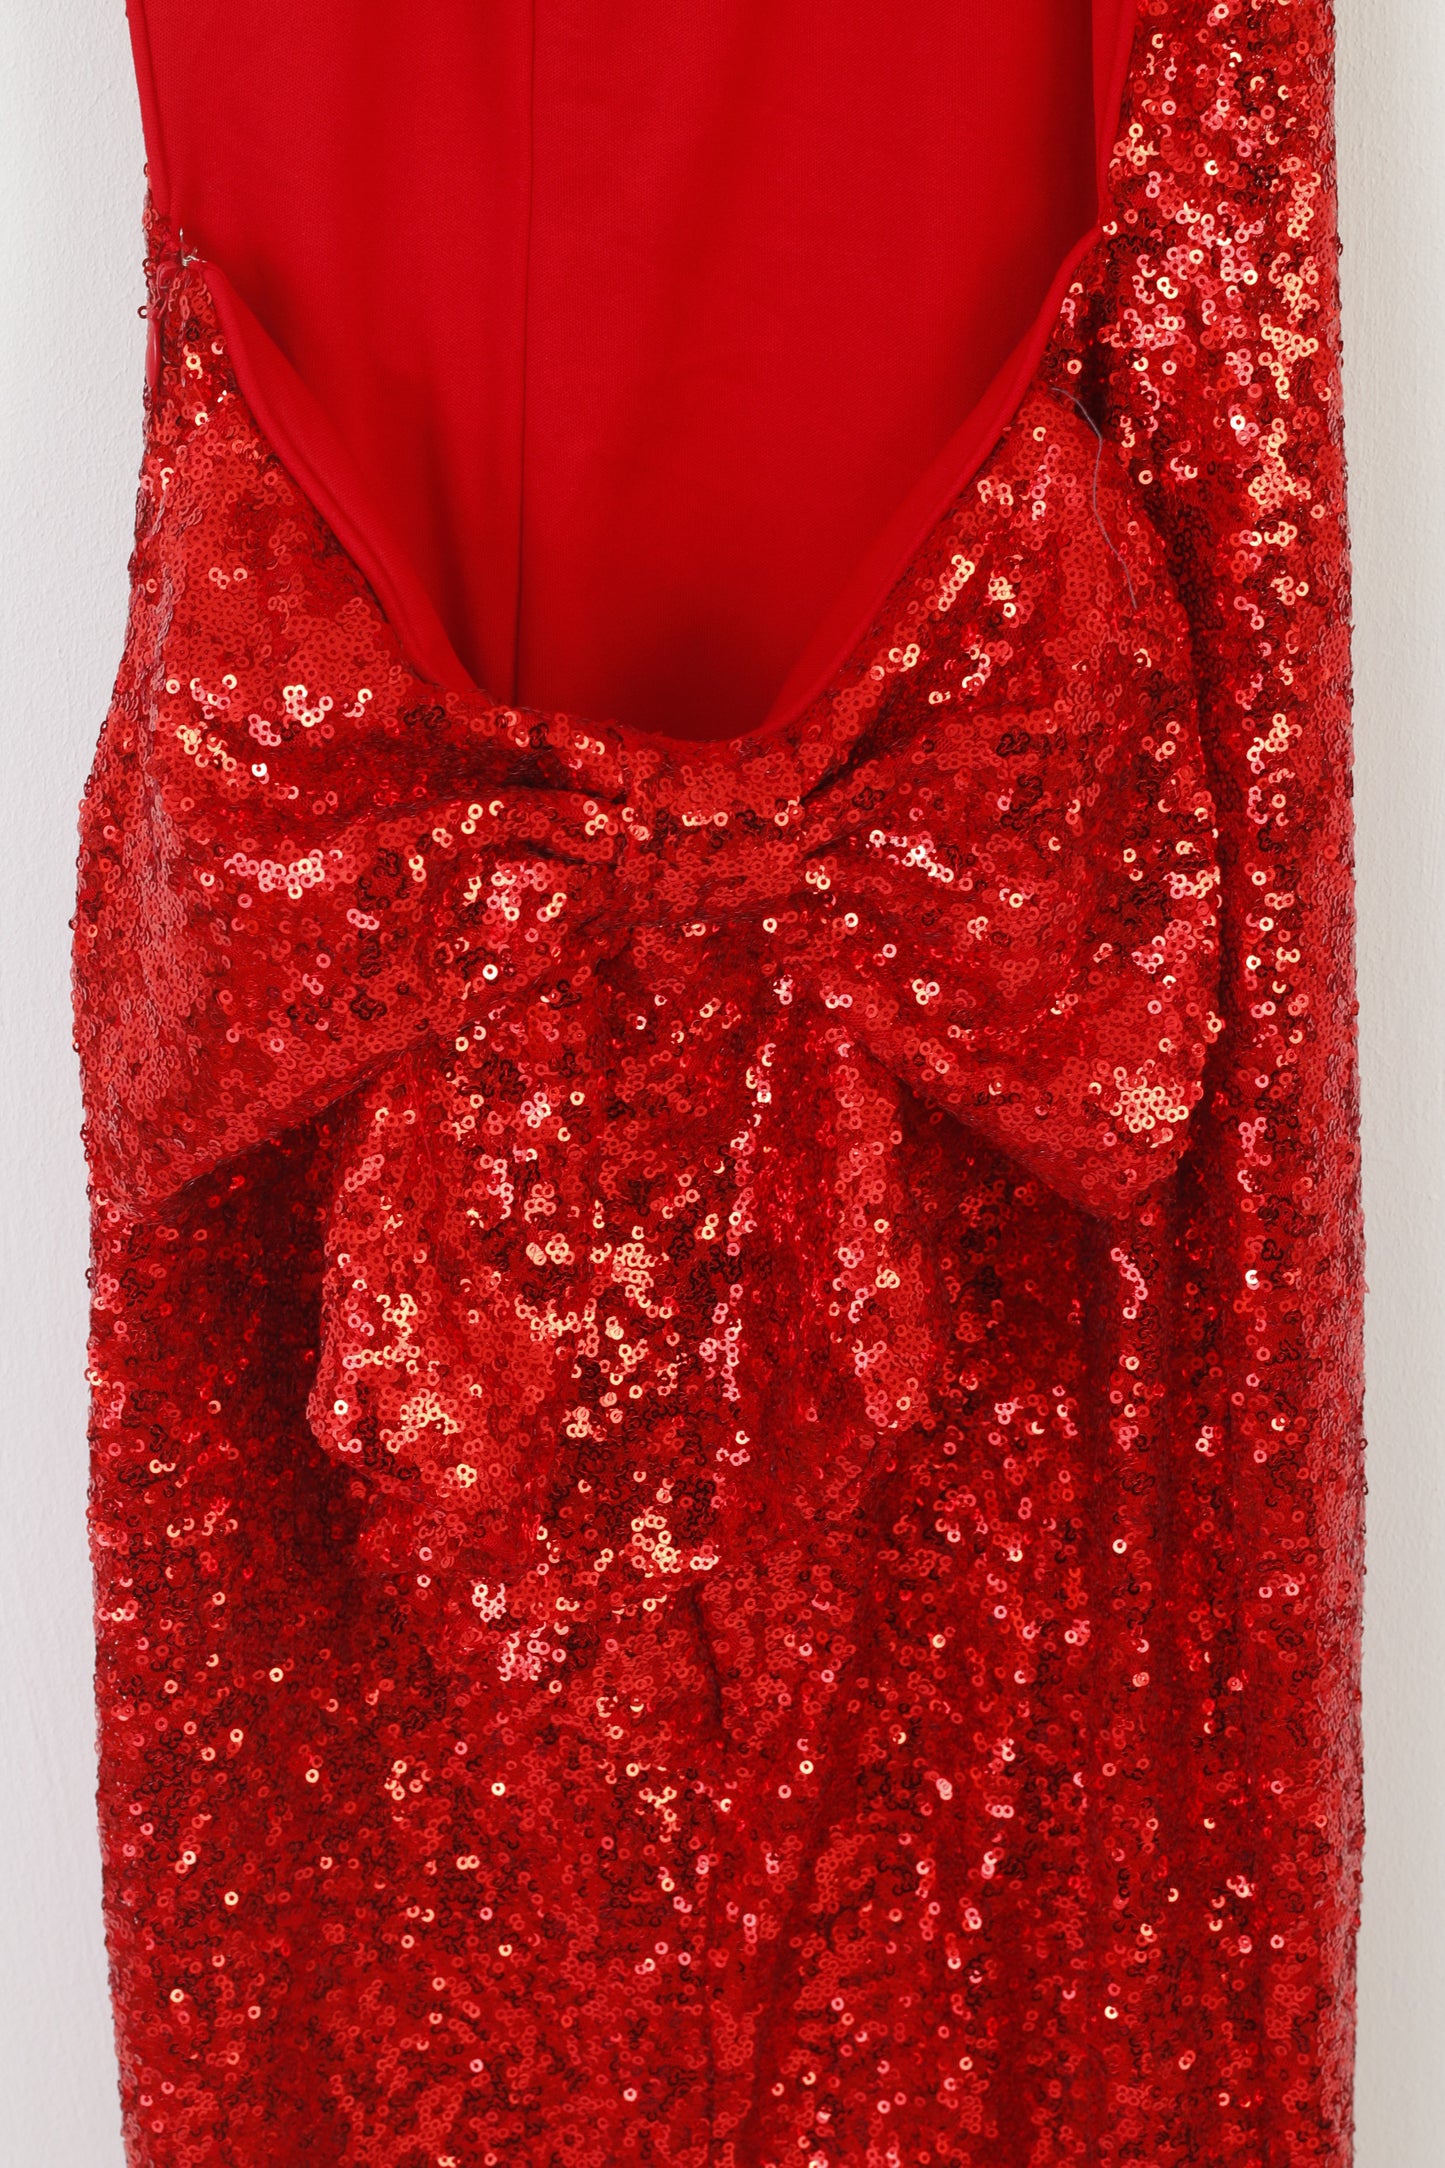 Pink Boutique Women 10 38 Maxi Dress Red Sequin Bow at the Back Sexi Evening Gown